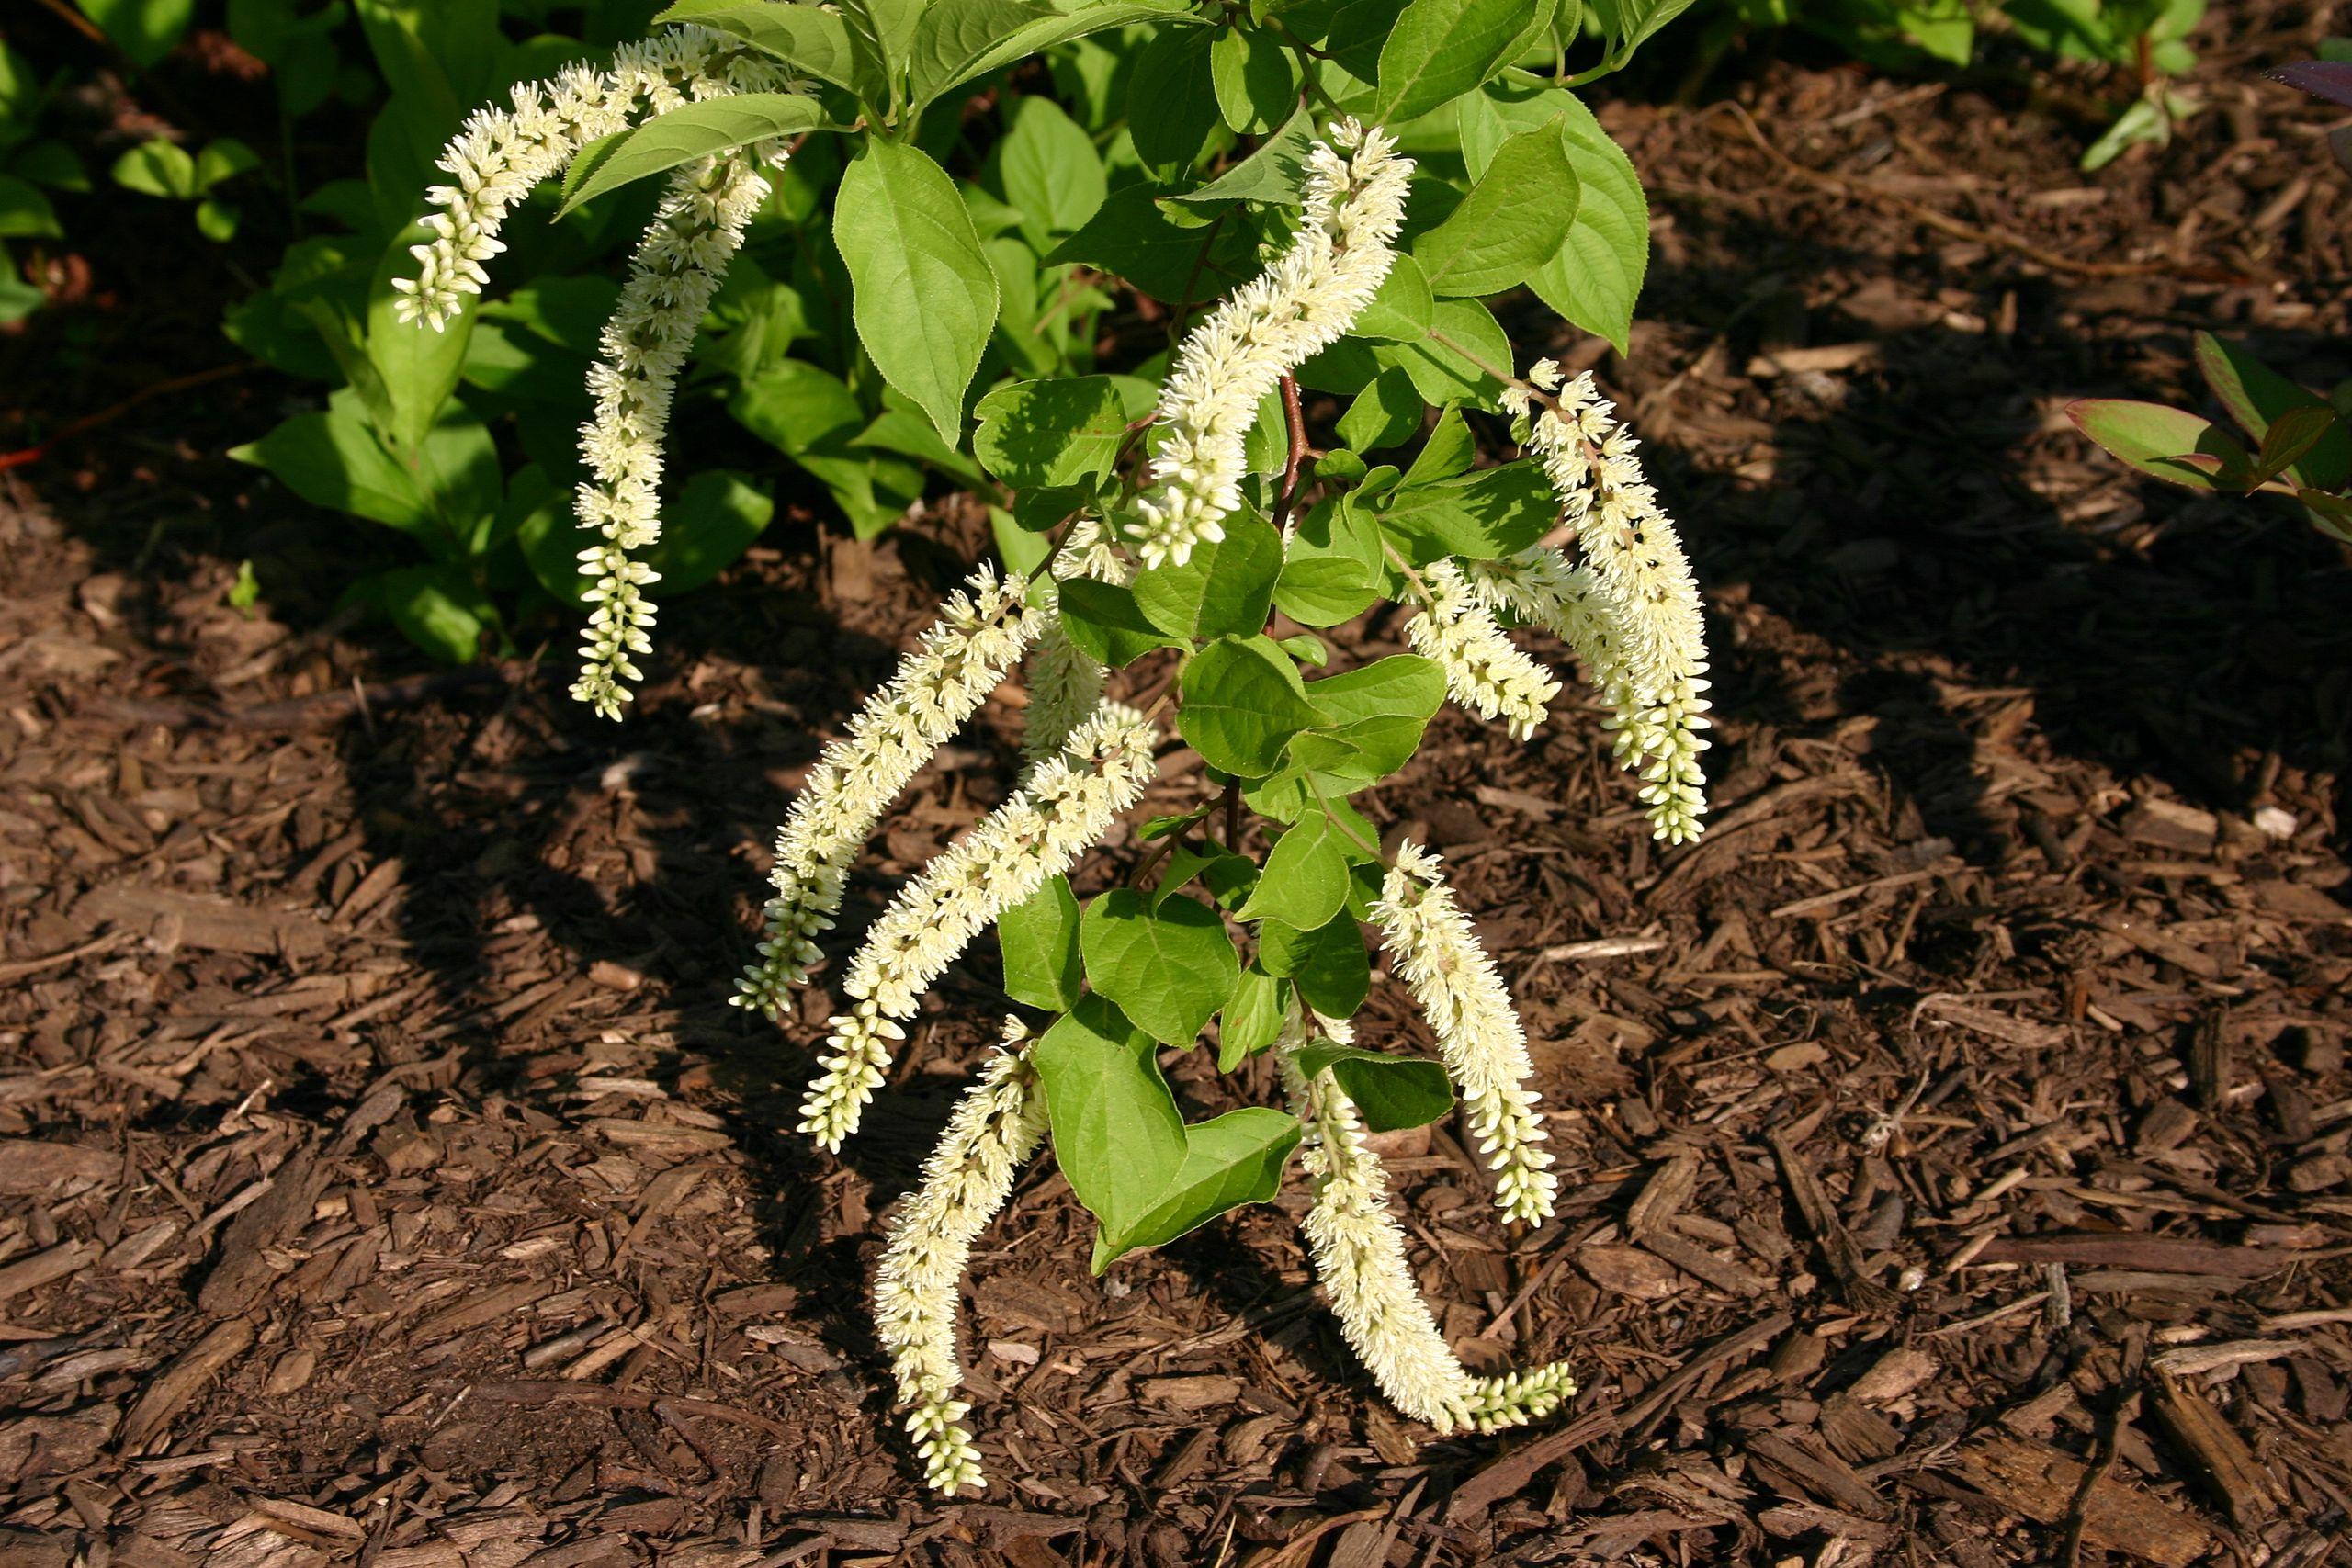 Off-white flowers with buds, green leaves, beige stems, brown branches, yellow midrib, veins and blades.